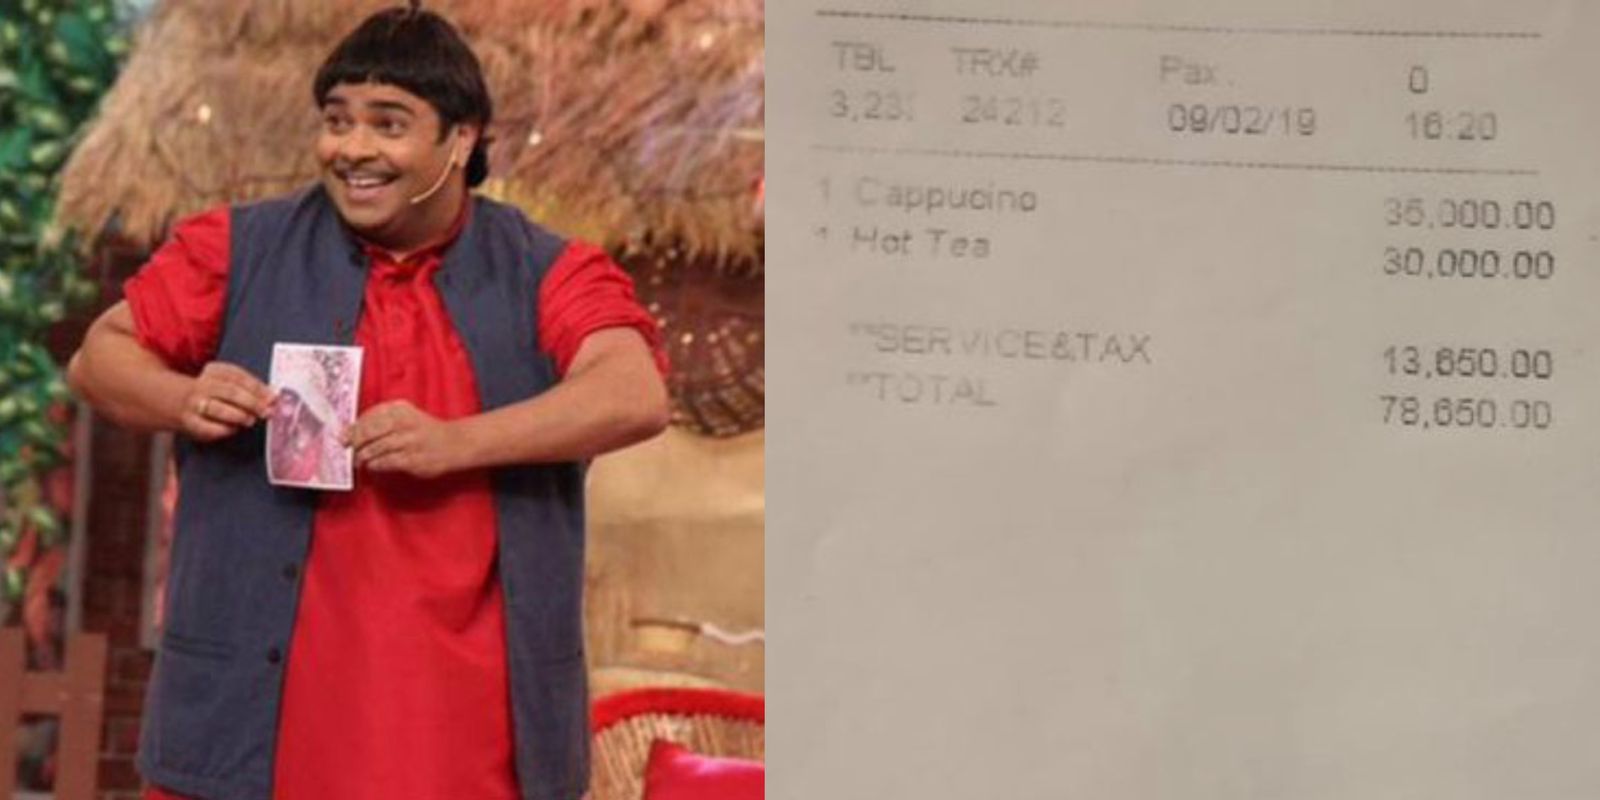 Comedian Kiku Sharda Pays 78,650 For Cappuccino And Tea, But Here’s Why He Didn’t Complain!